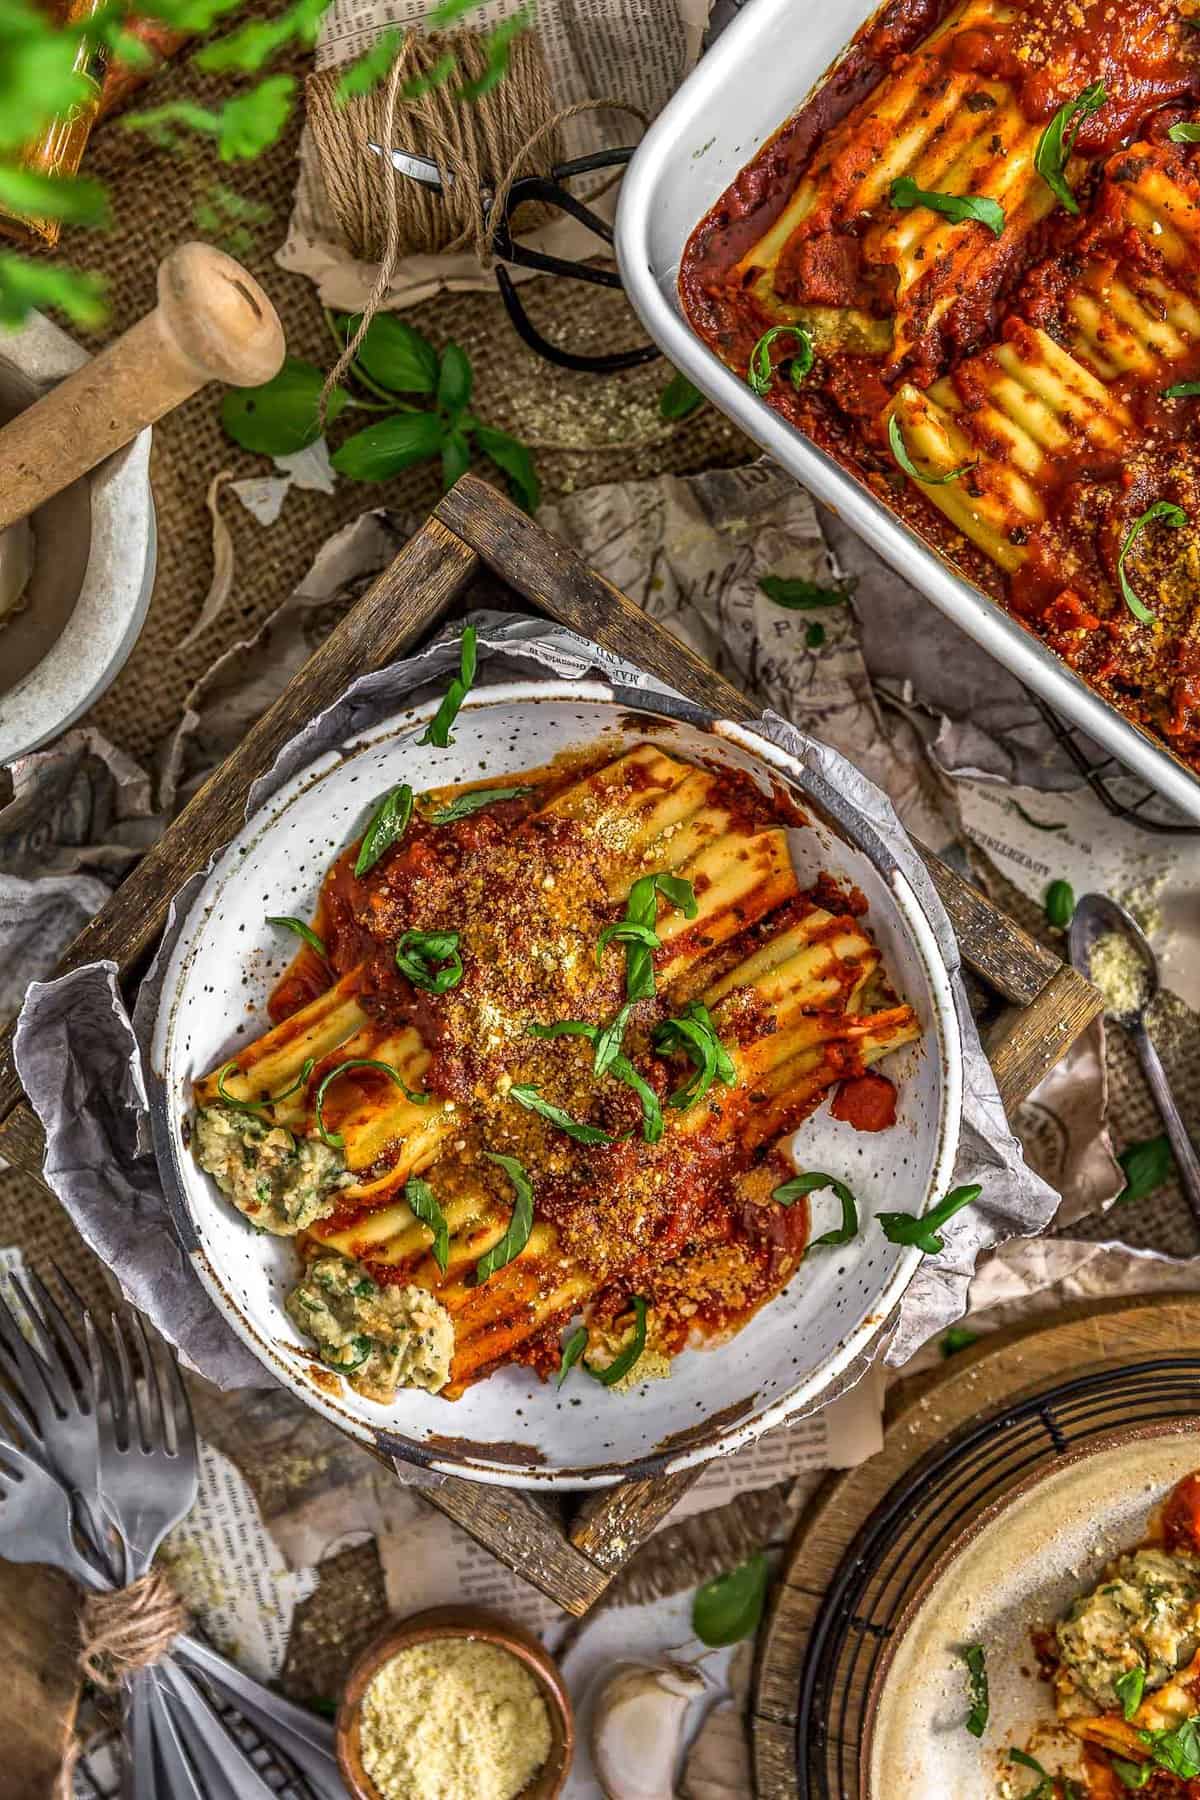 Tablescape of Vegan Manicotti Stuffed with Cauliflower Cream and Spinach